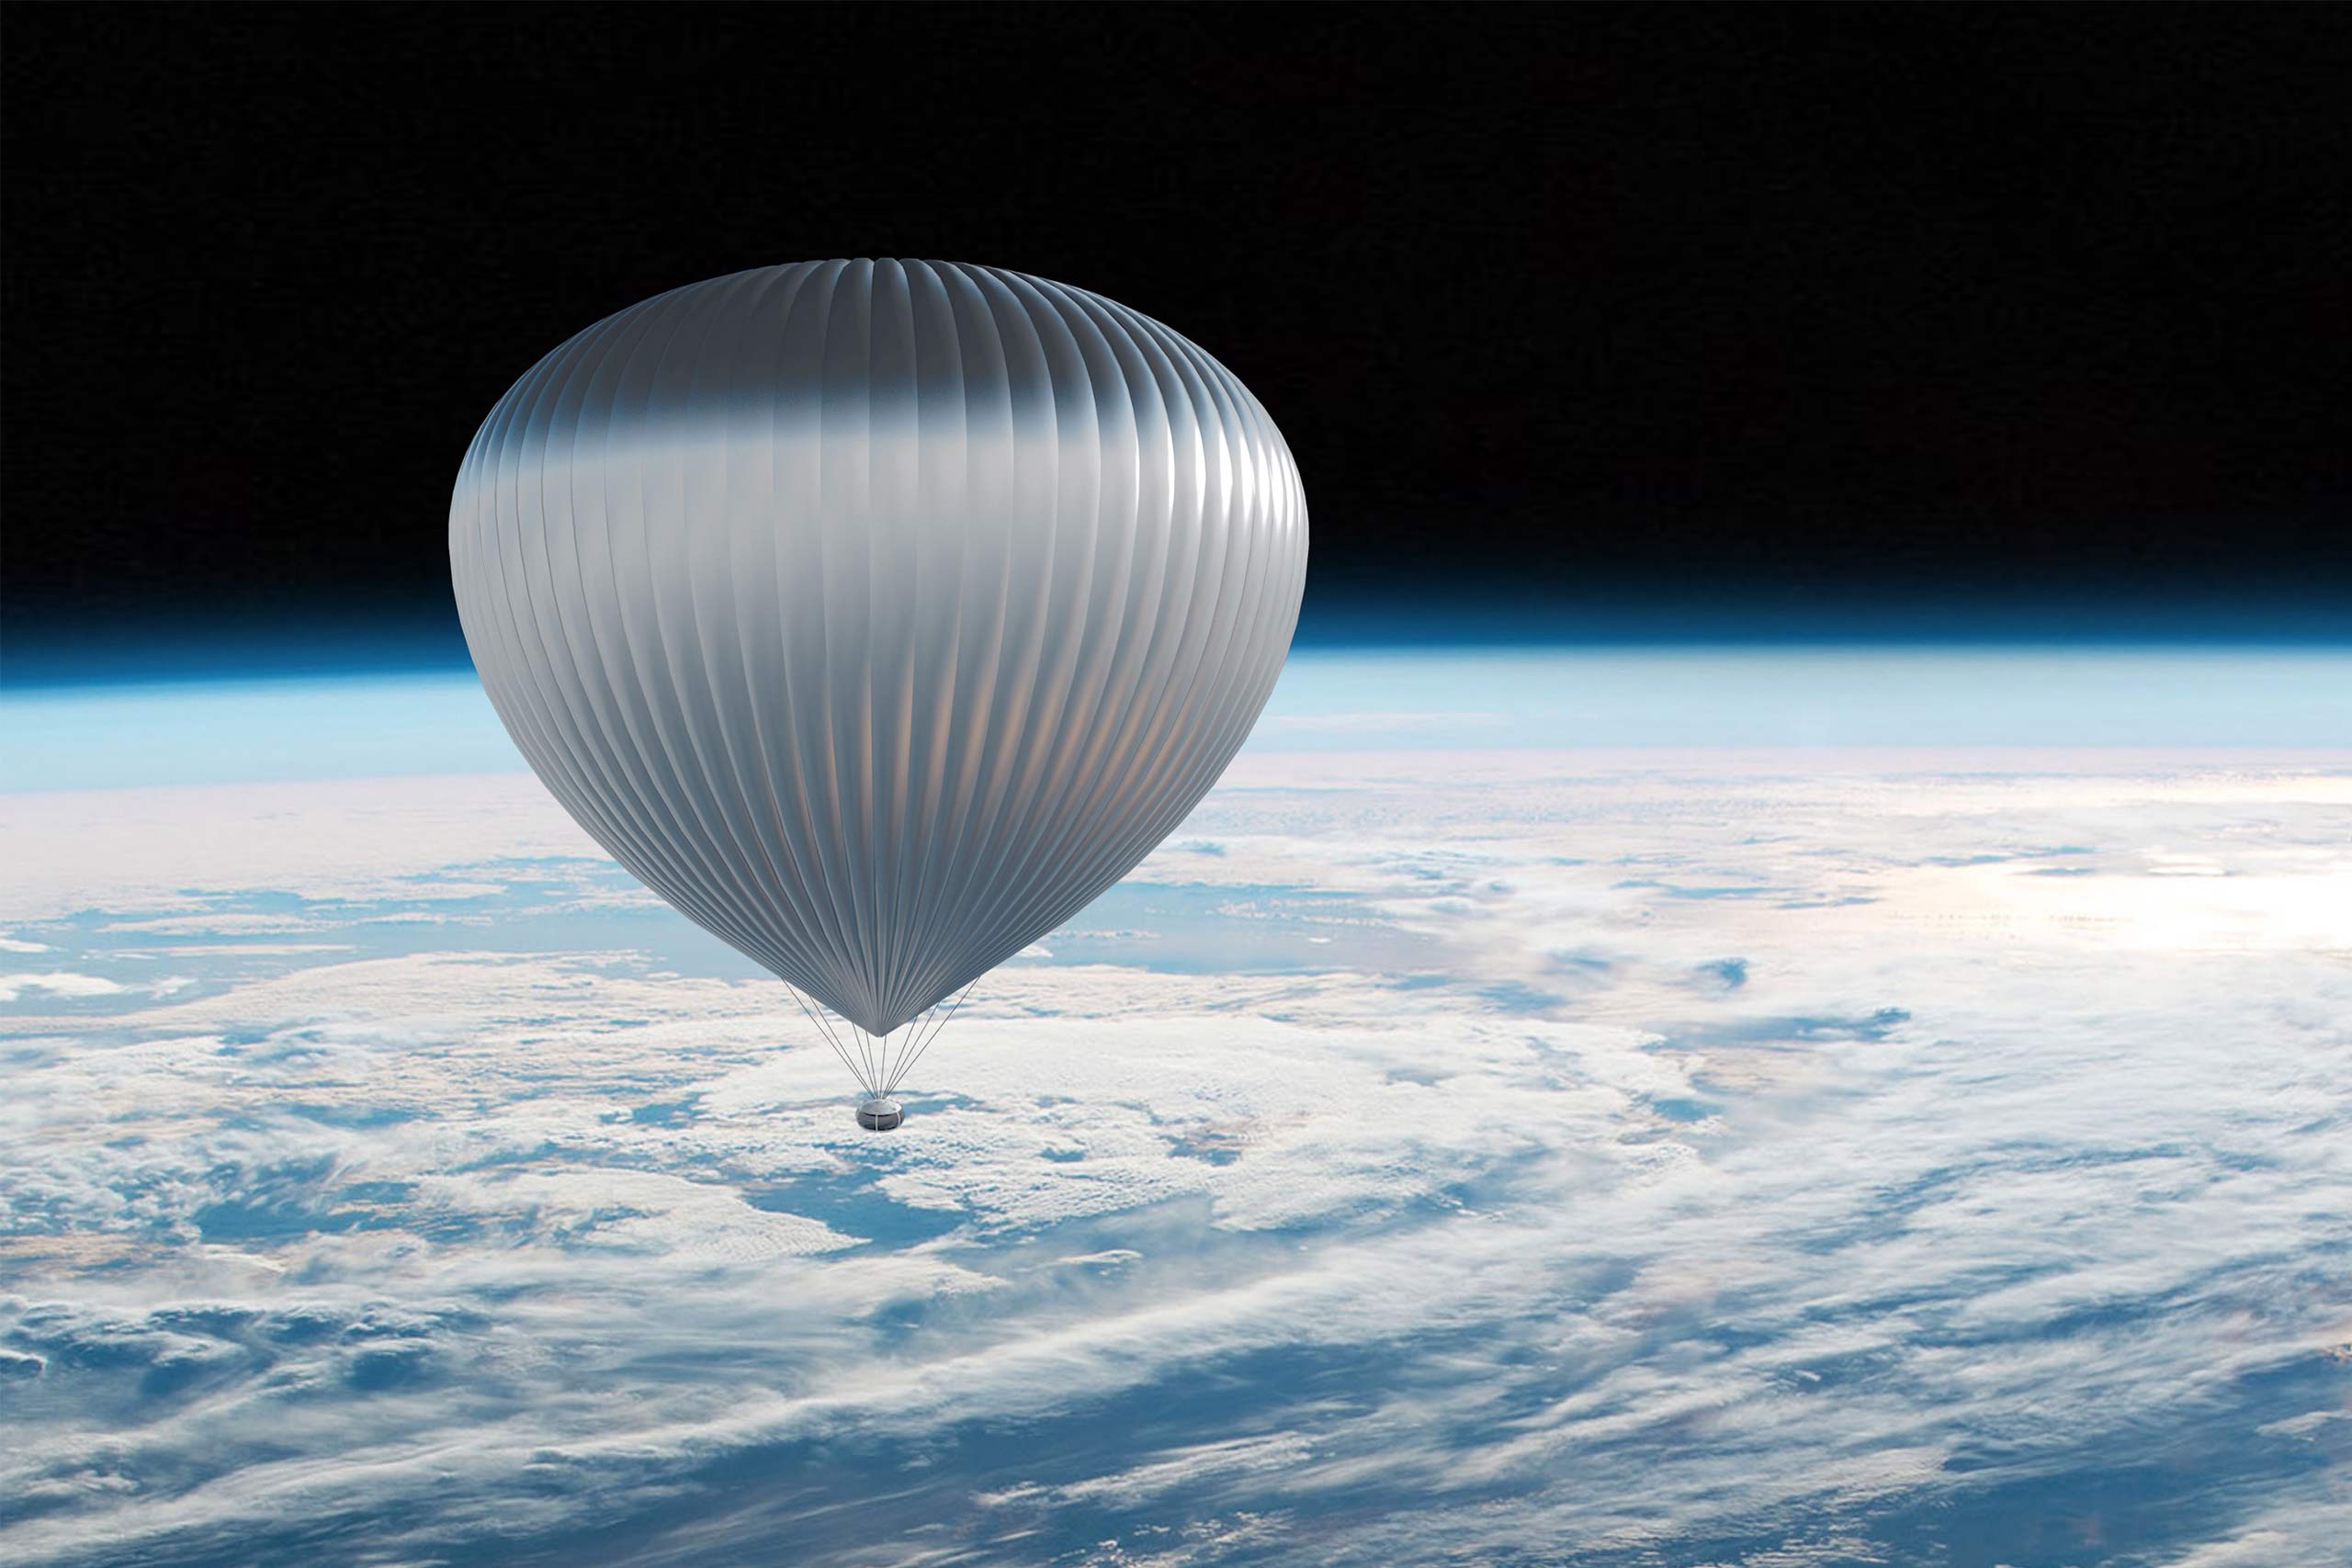 The Zephalto capsule lifted by a stratospheric balloon transporting guests to outer space